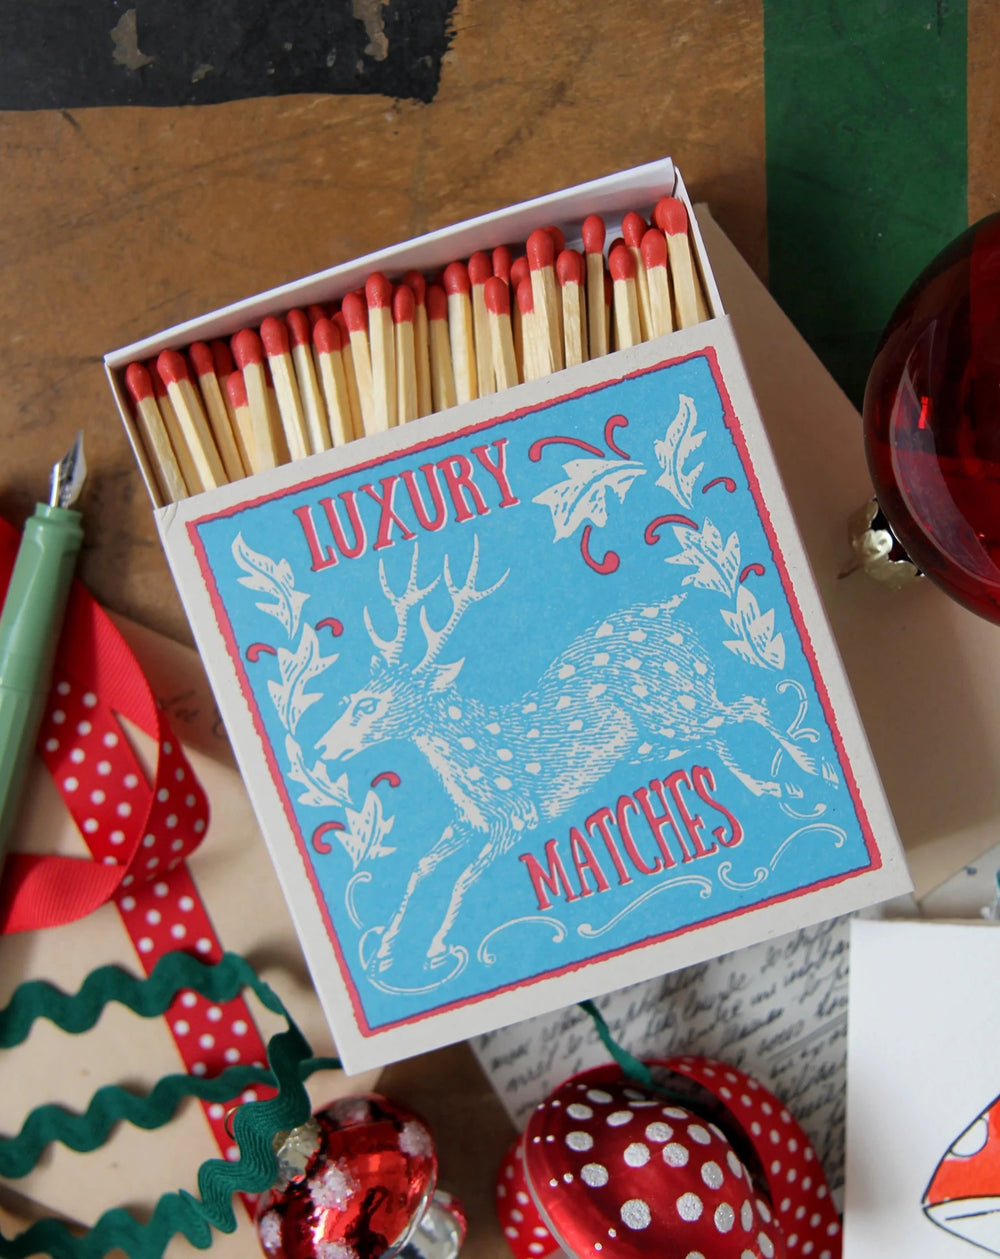 luxury matches with vintage stag design surrounded by Christmas decorations, ribbons and trims